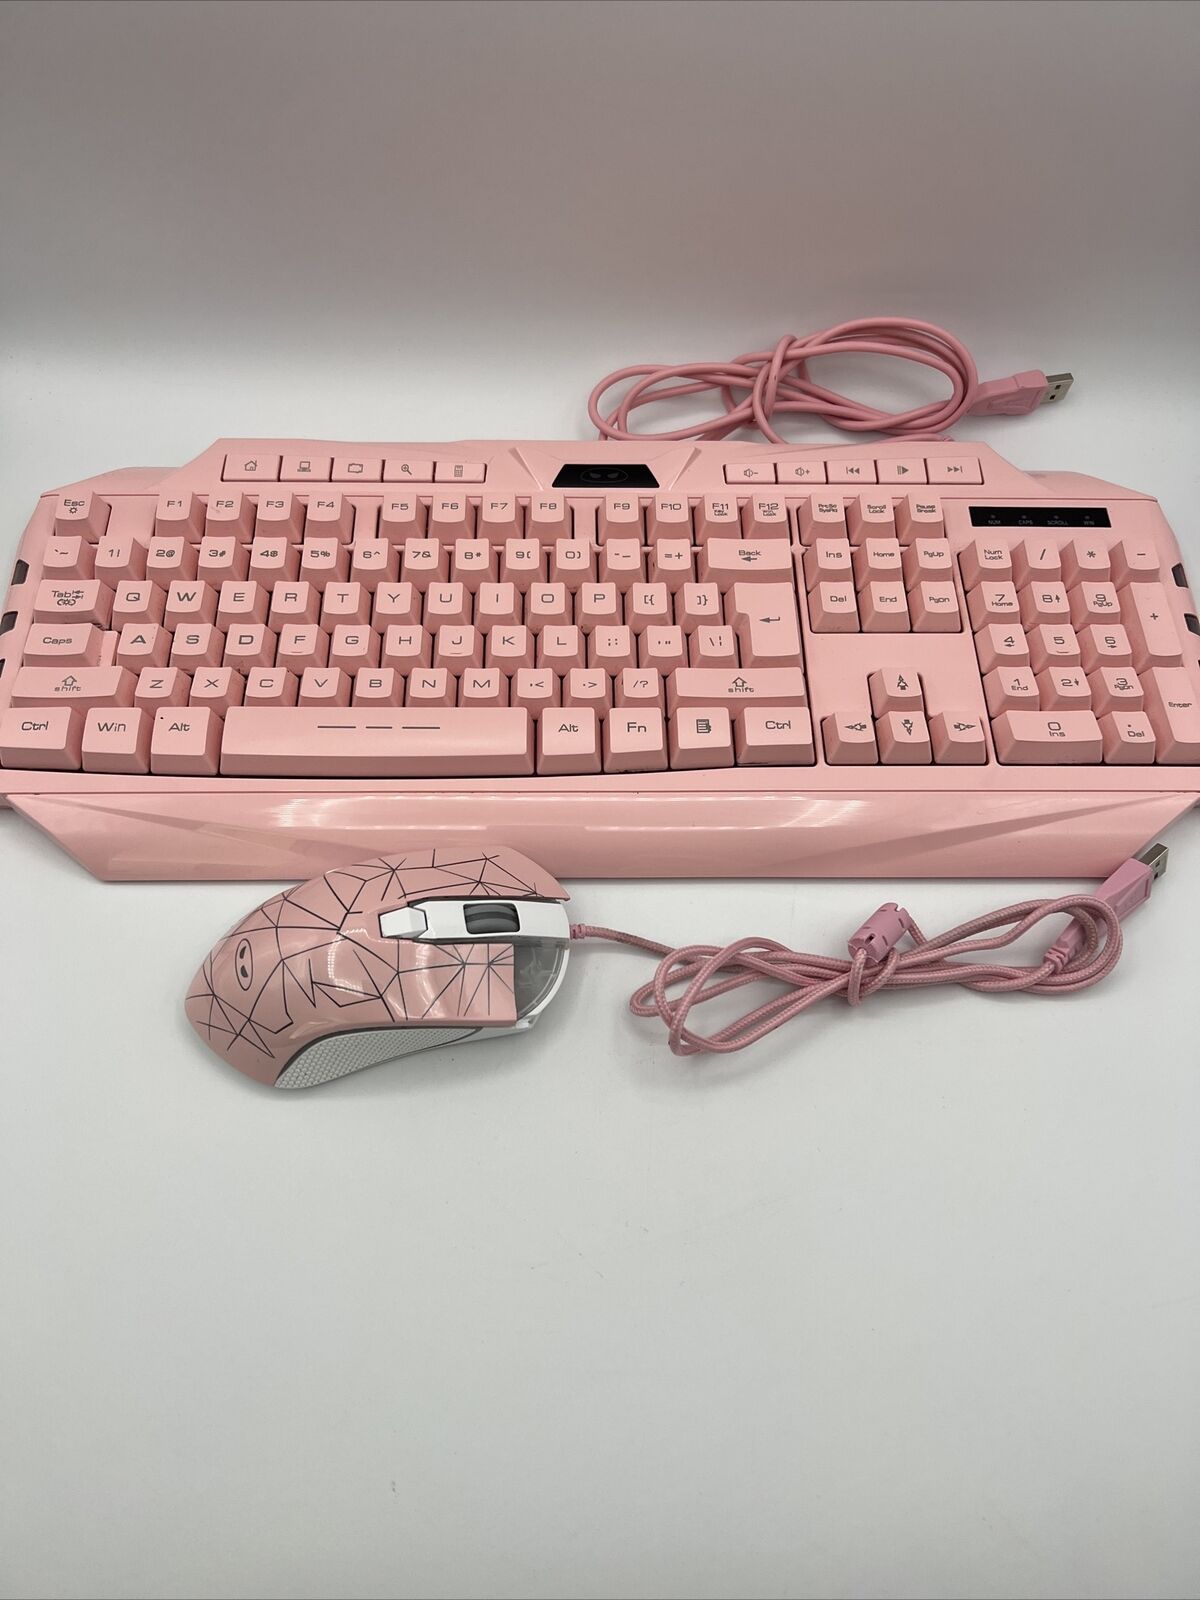 MAGEGEE GK710 RGB Backlight Pink Keyboard & Mouse